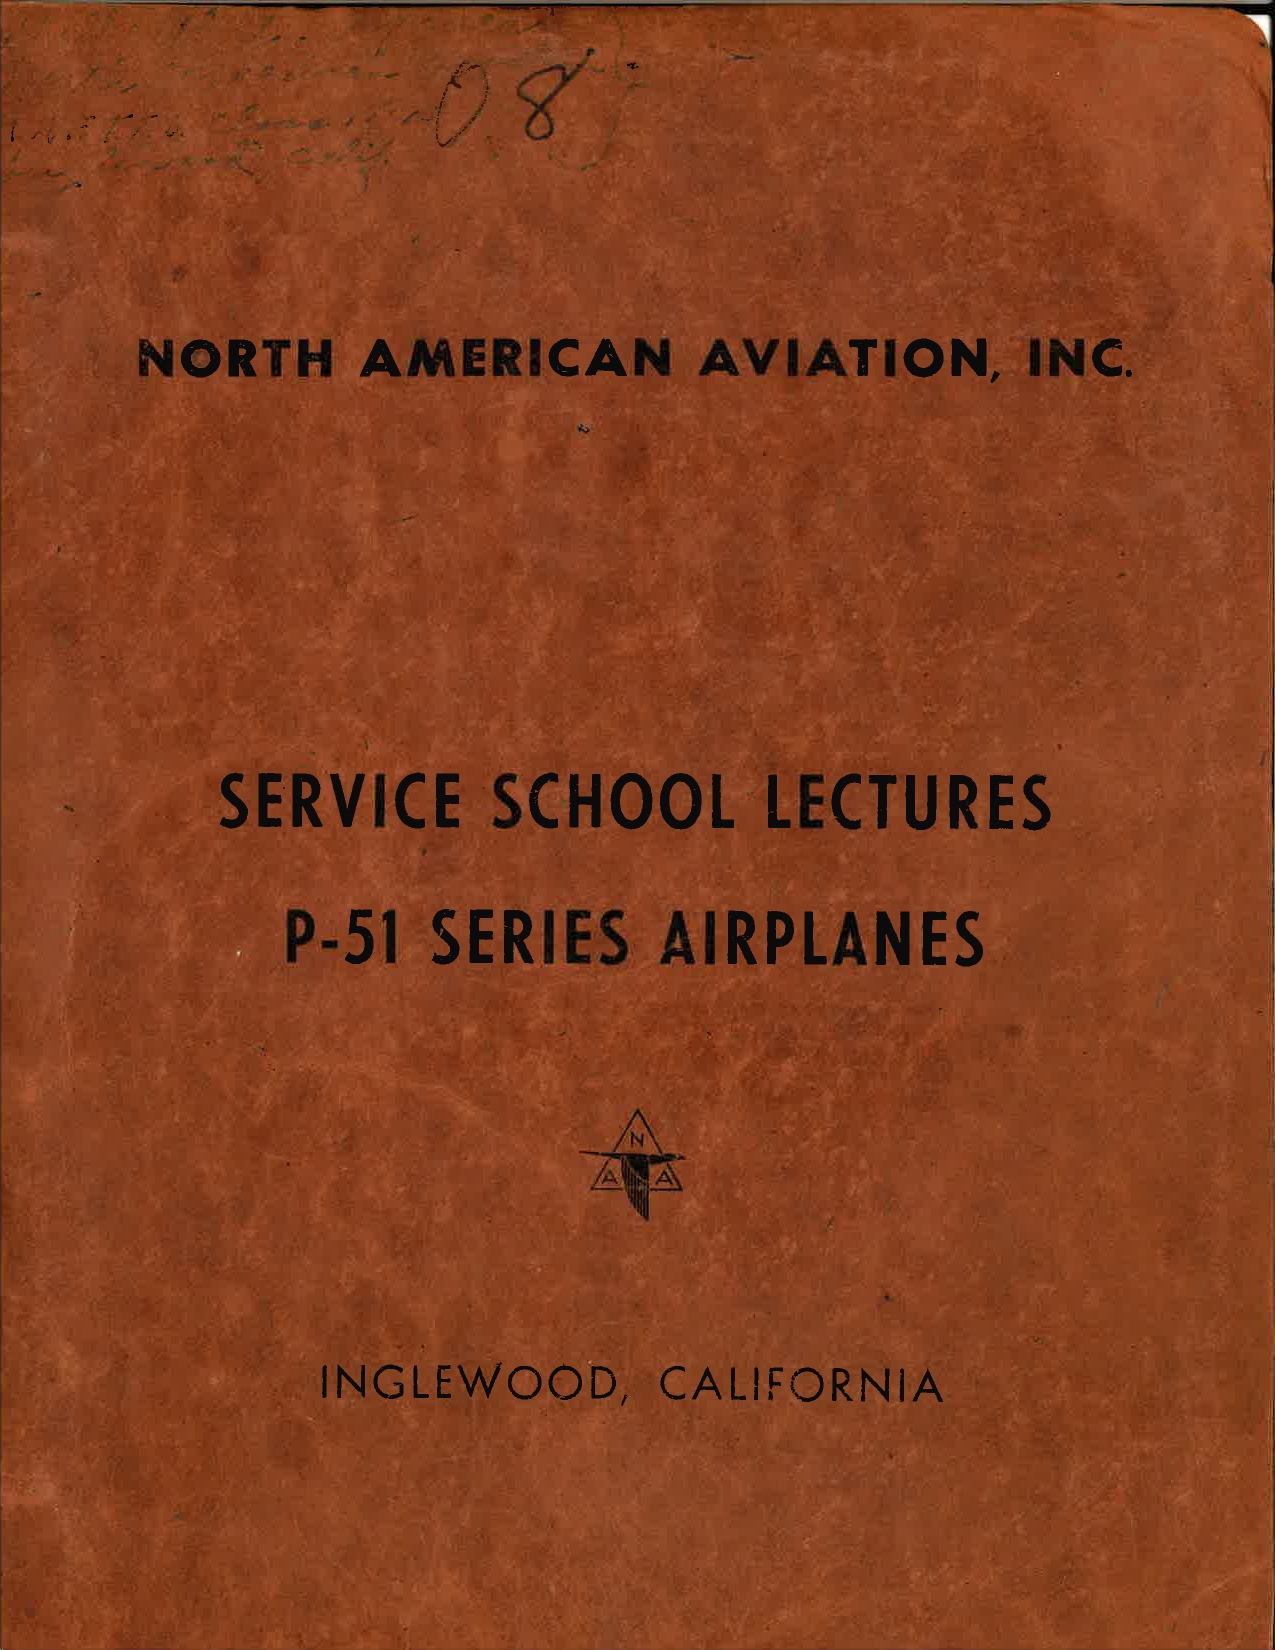 Sample page 1 from AirCorps Library document: Service School Lectures for P-51 Series Aircraft